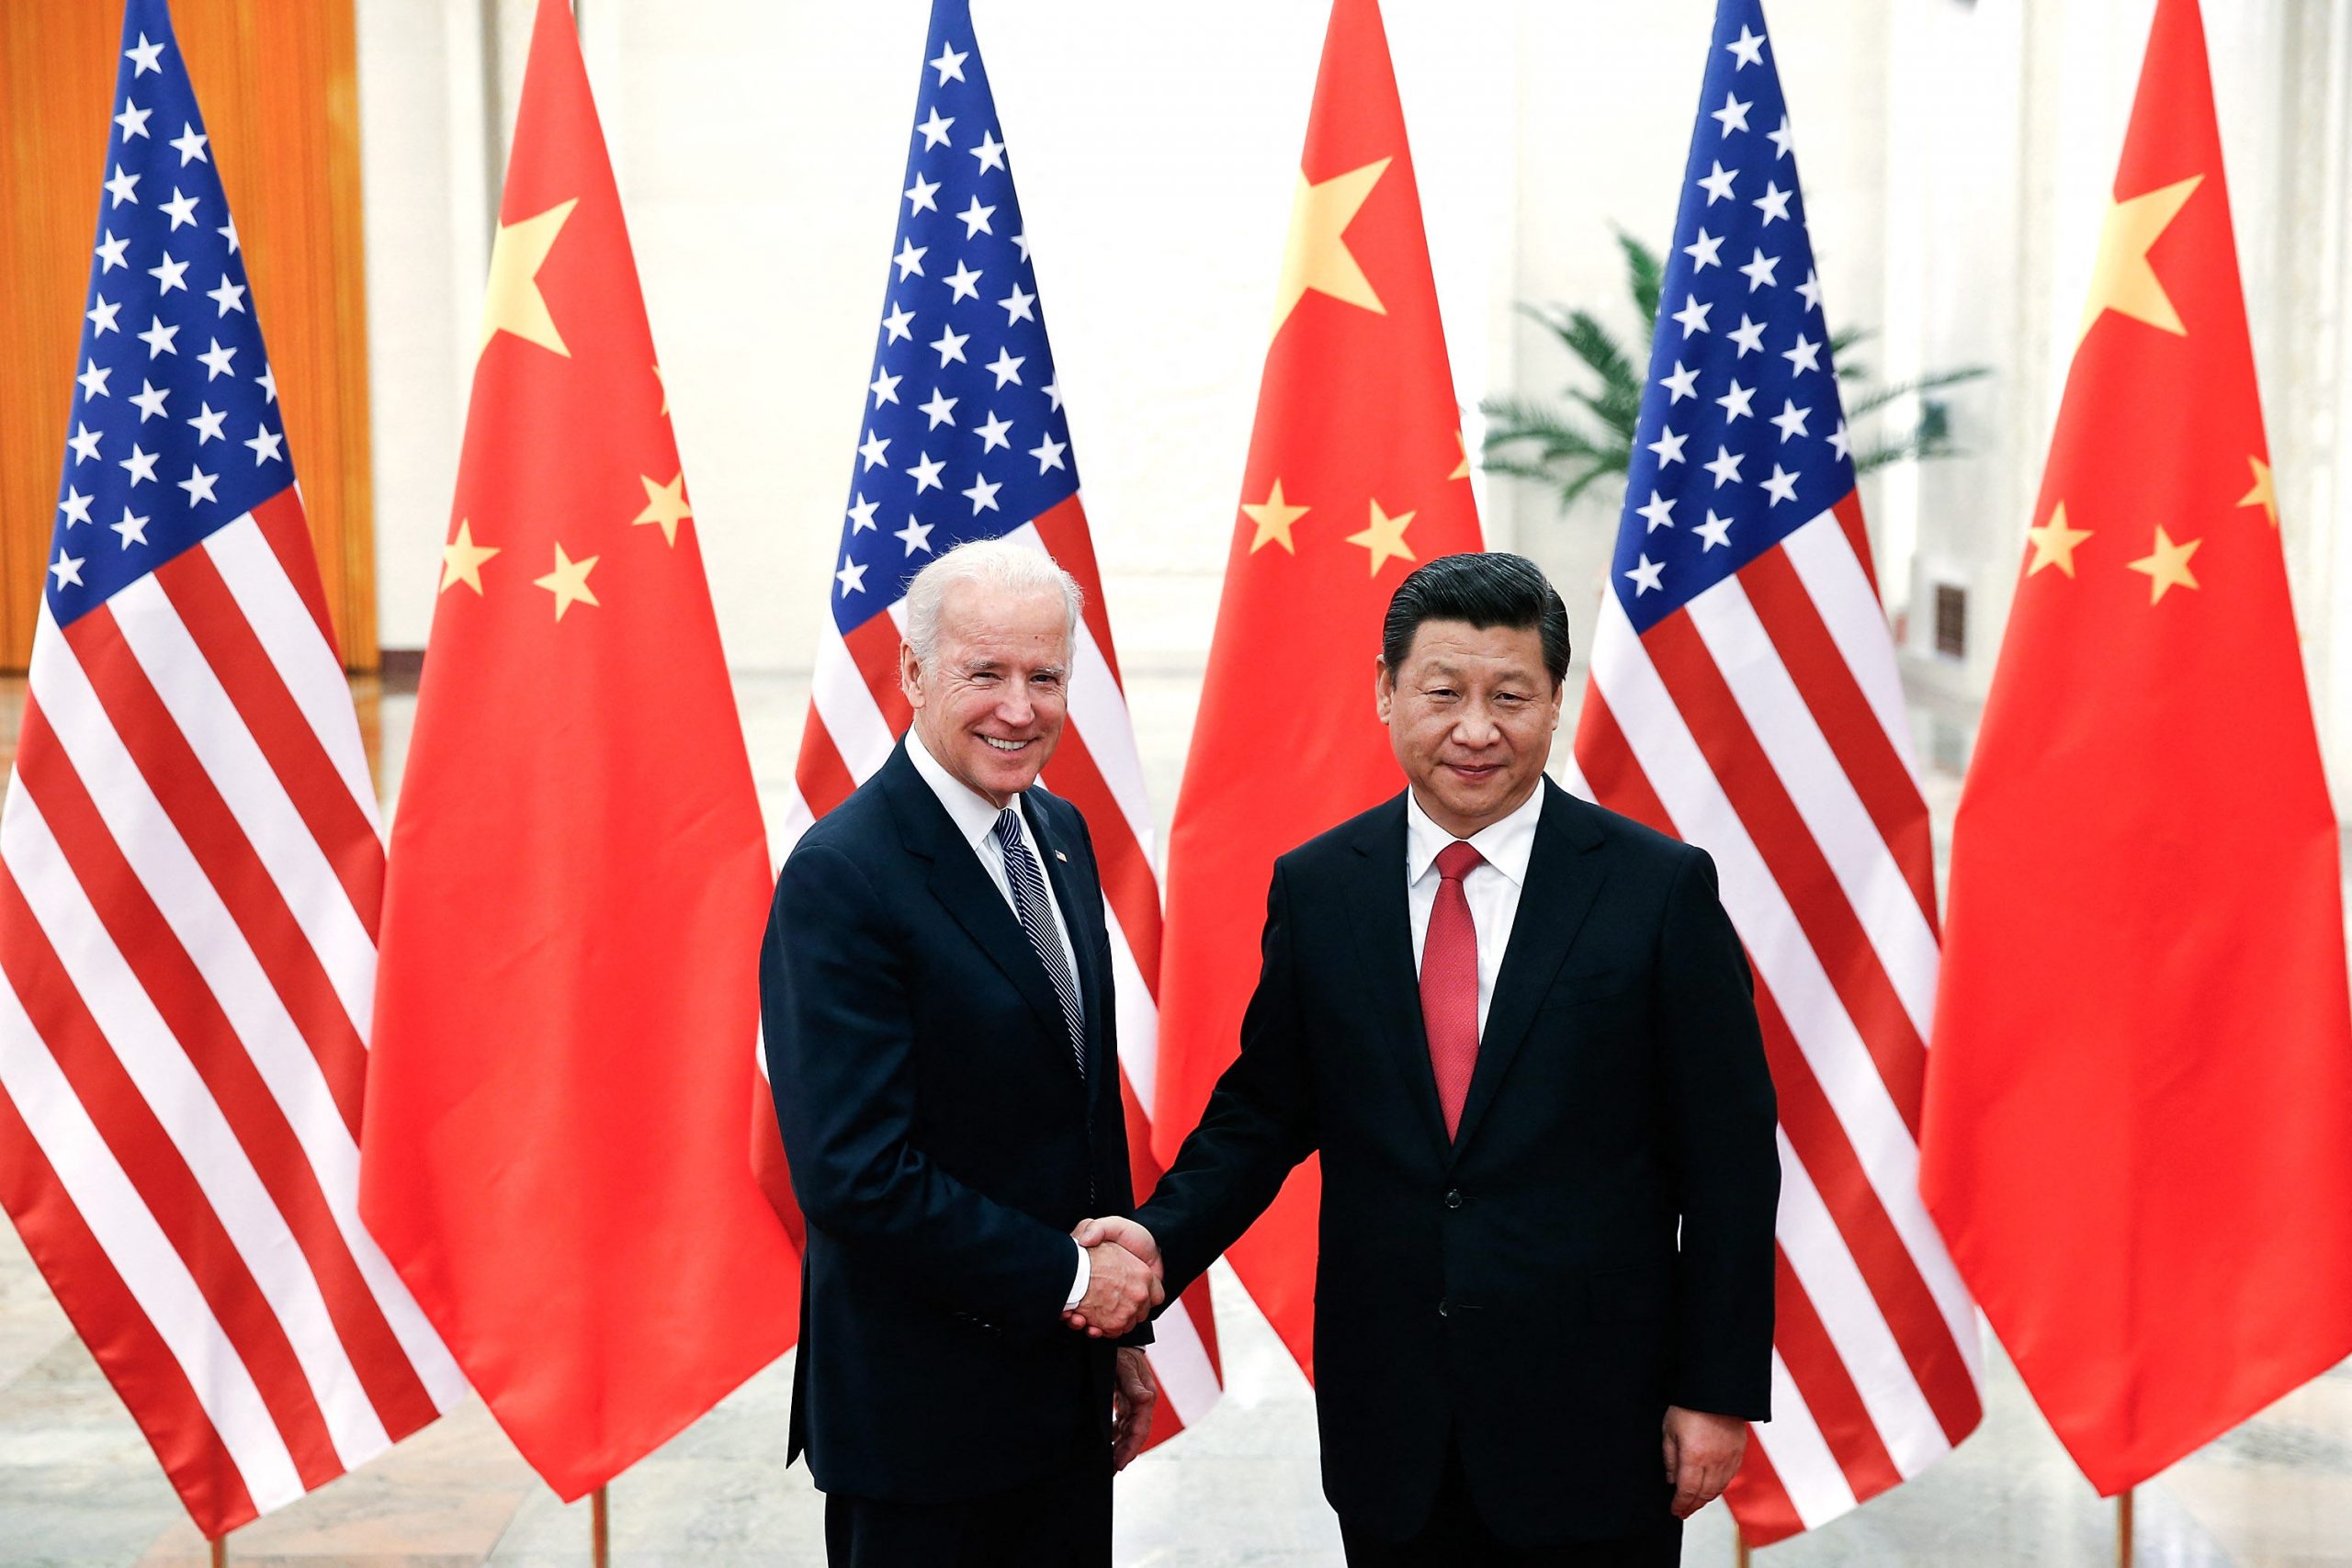 Xi Jinping to give ‘important speech’ at Joe Biden’s Earth Day summit